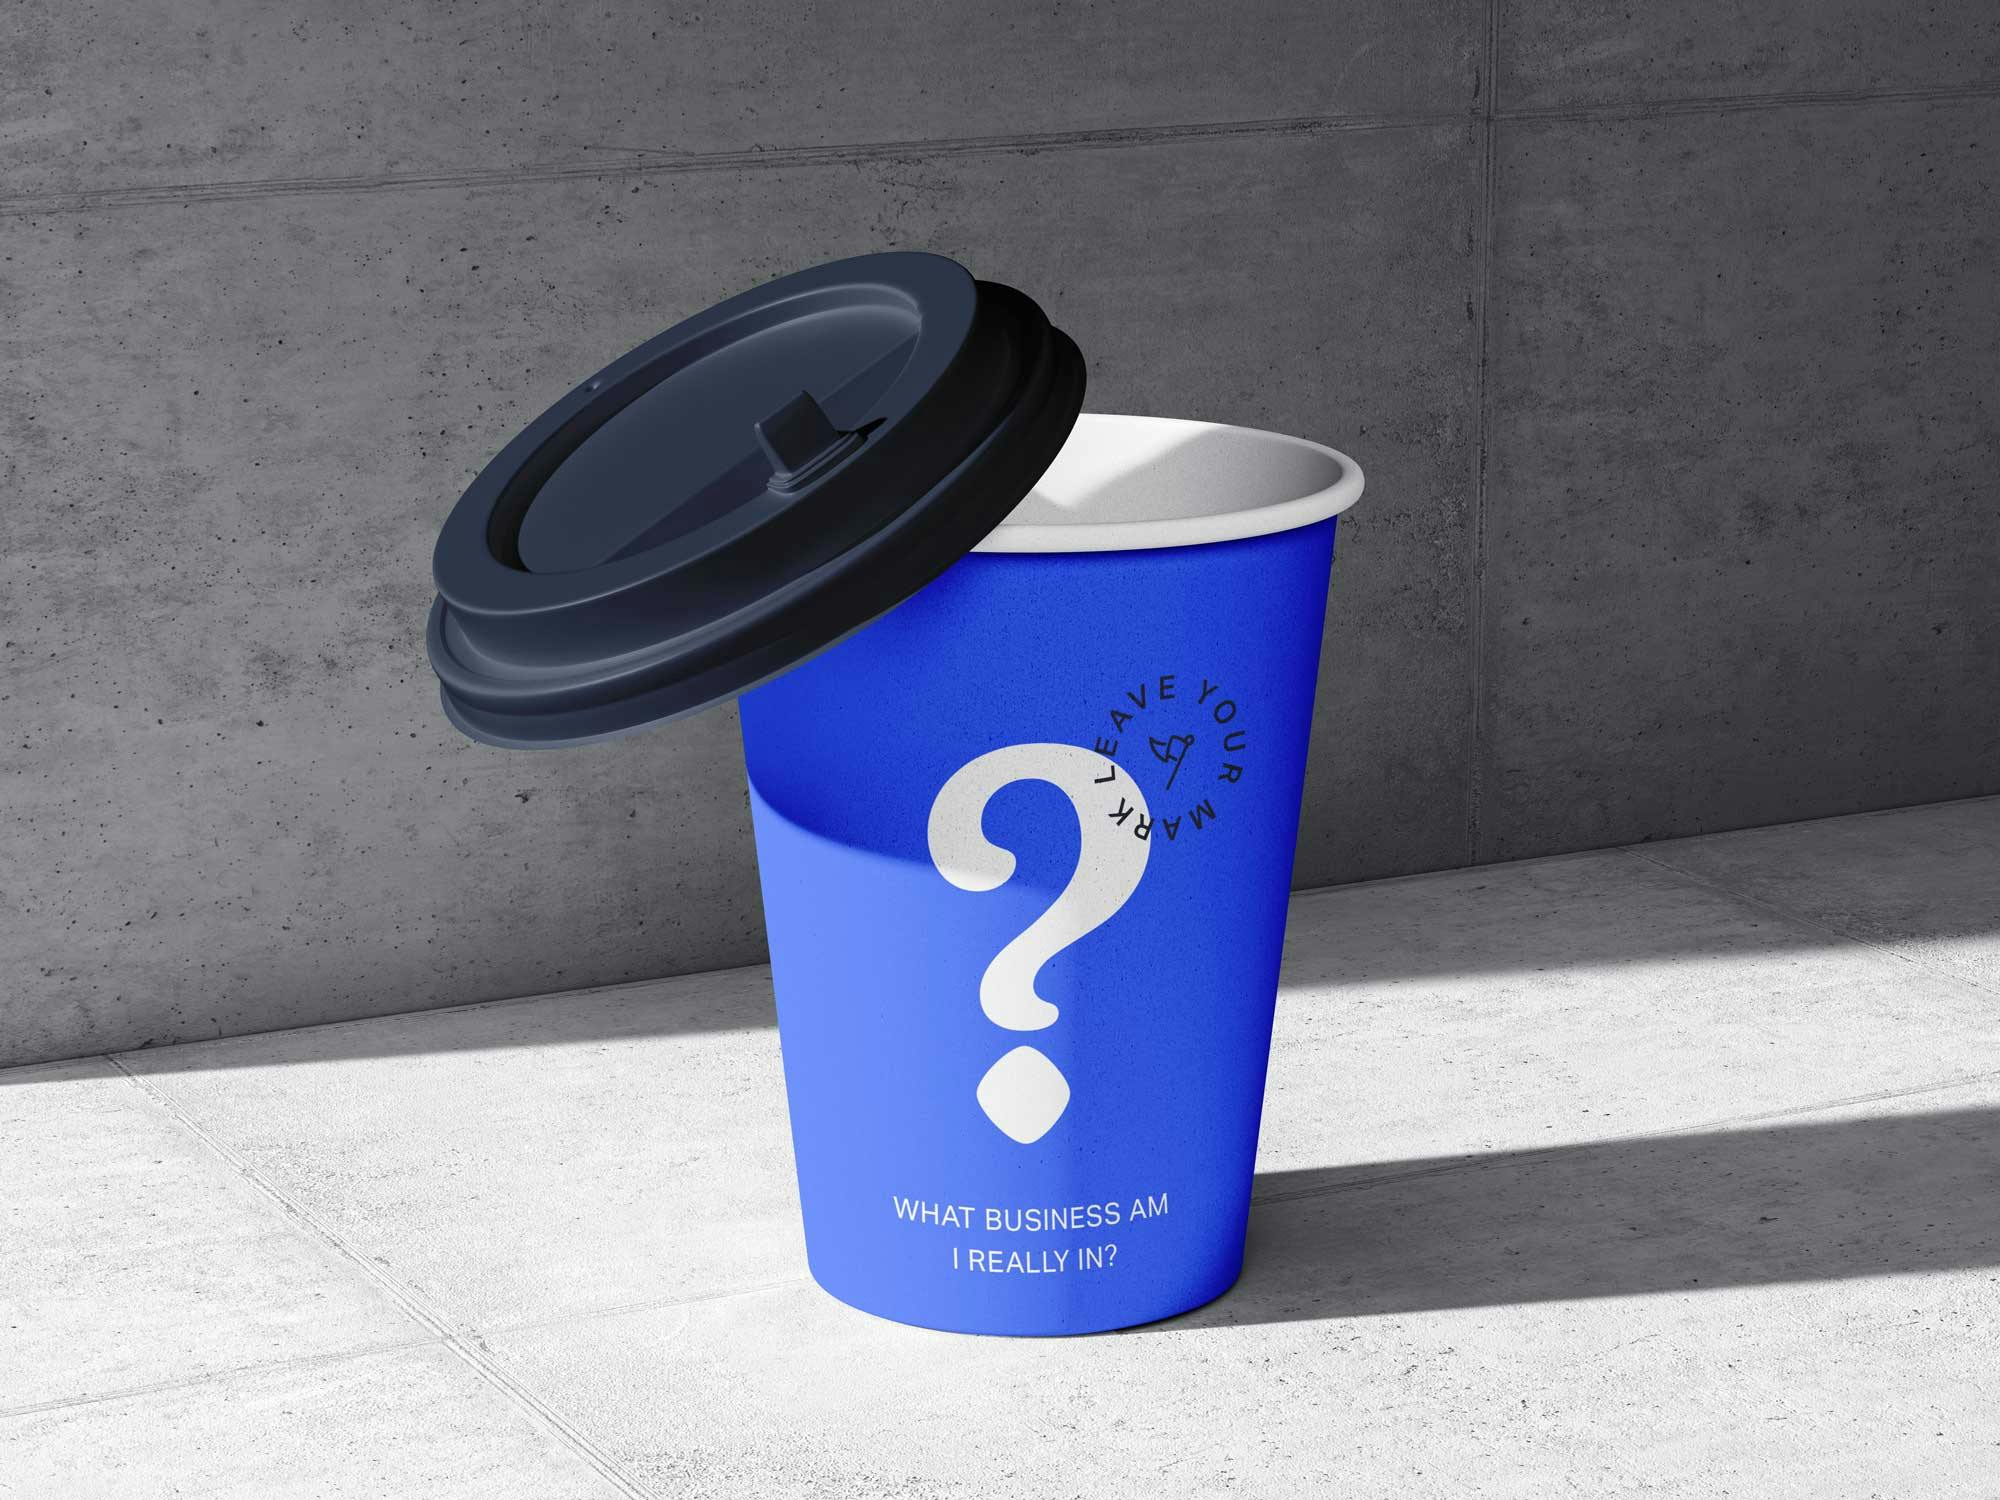 A blue coffee takeaway cup on a concrete background with a question mark and words saying what business are you really in?